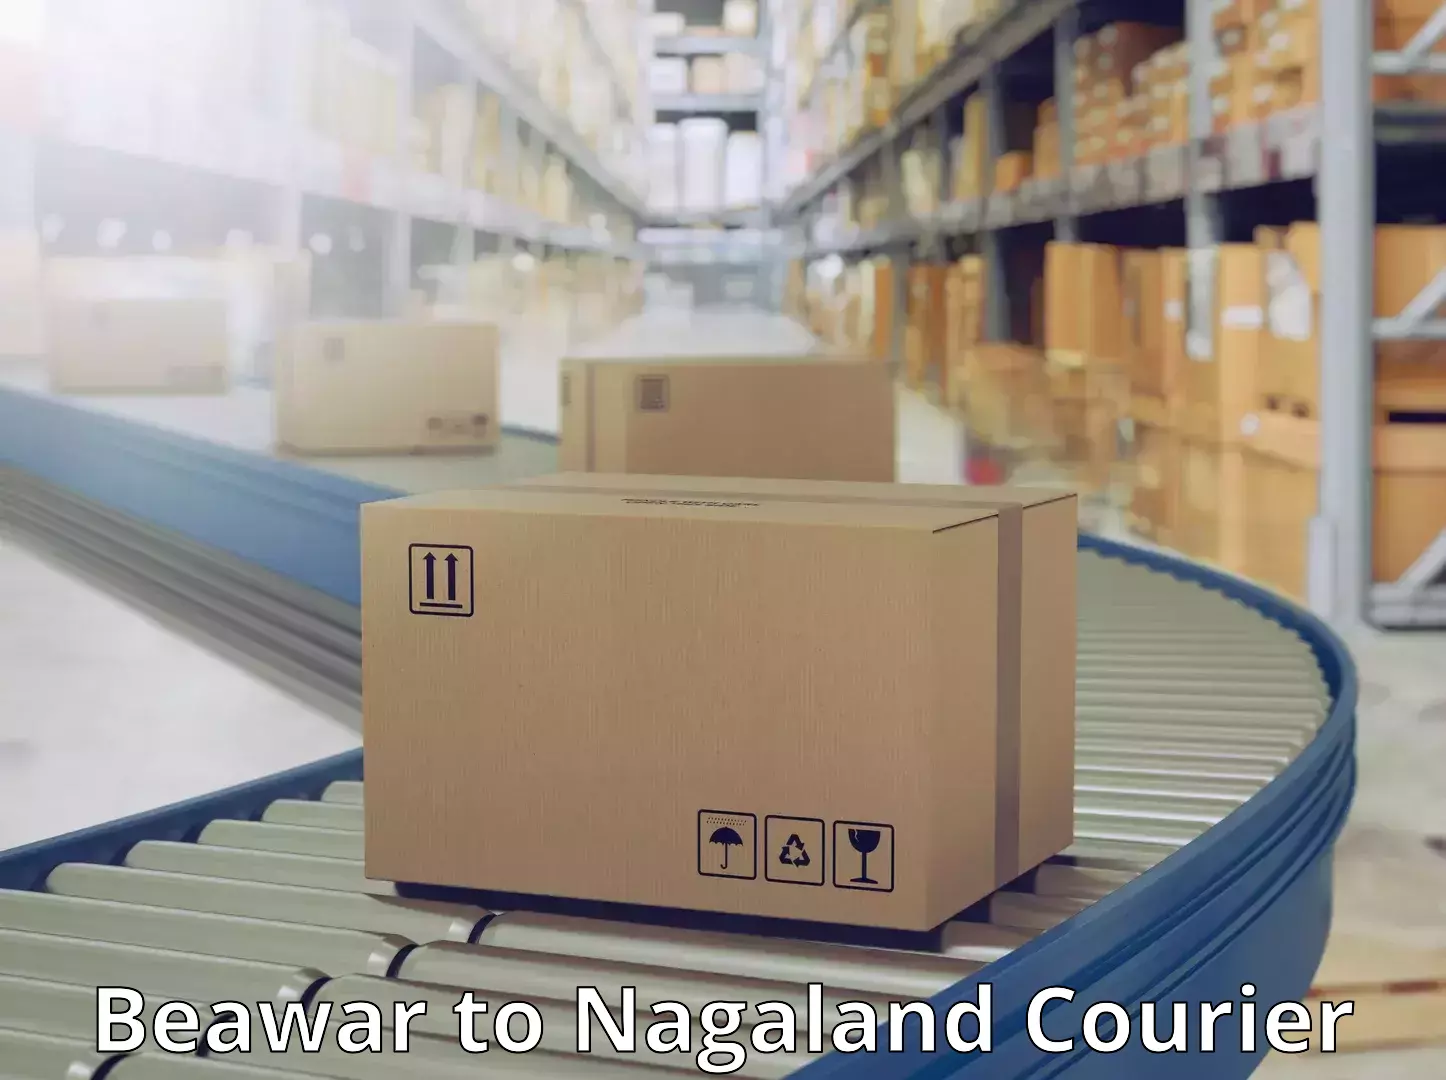 Quality courier partnerships Beawar to Nagaland